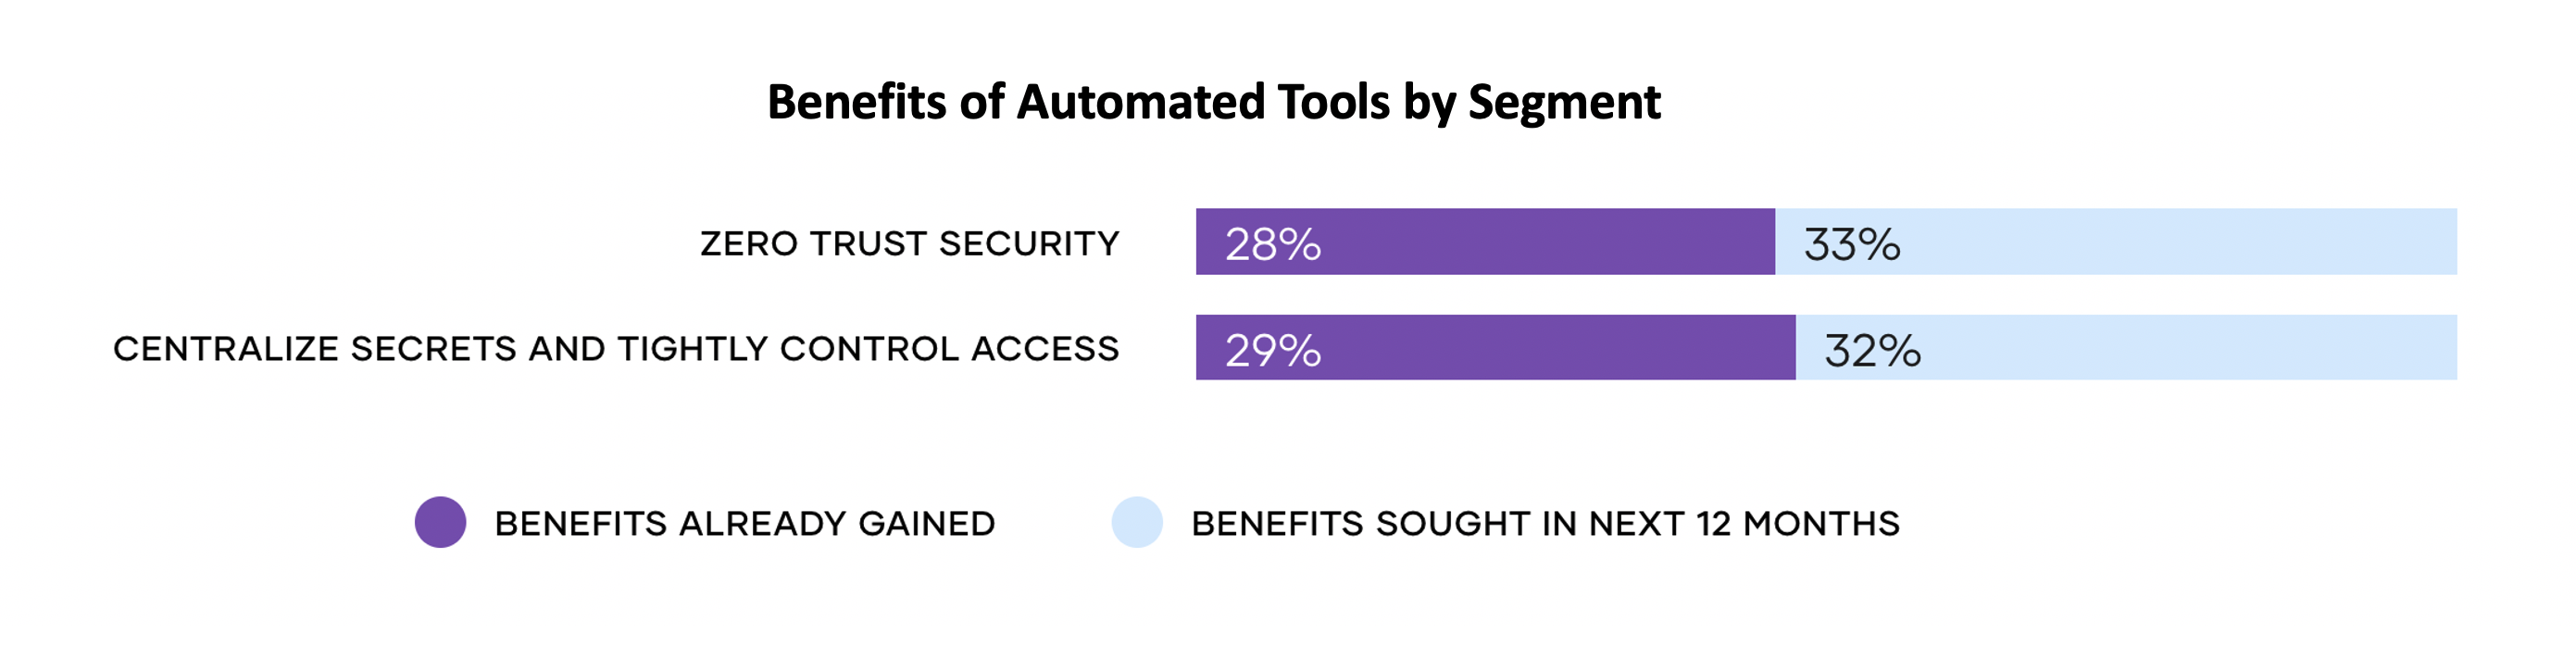 Benefits of automated tools by segment